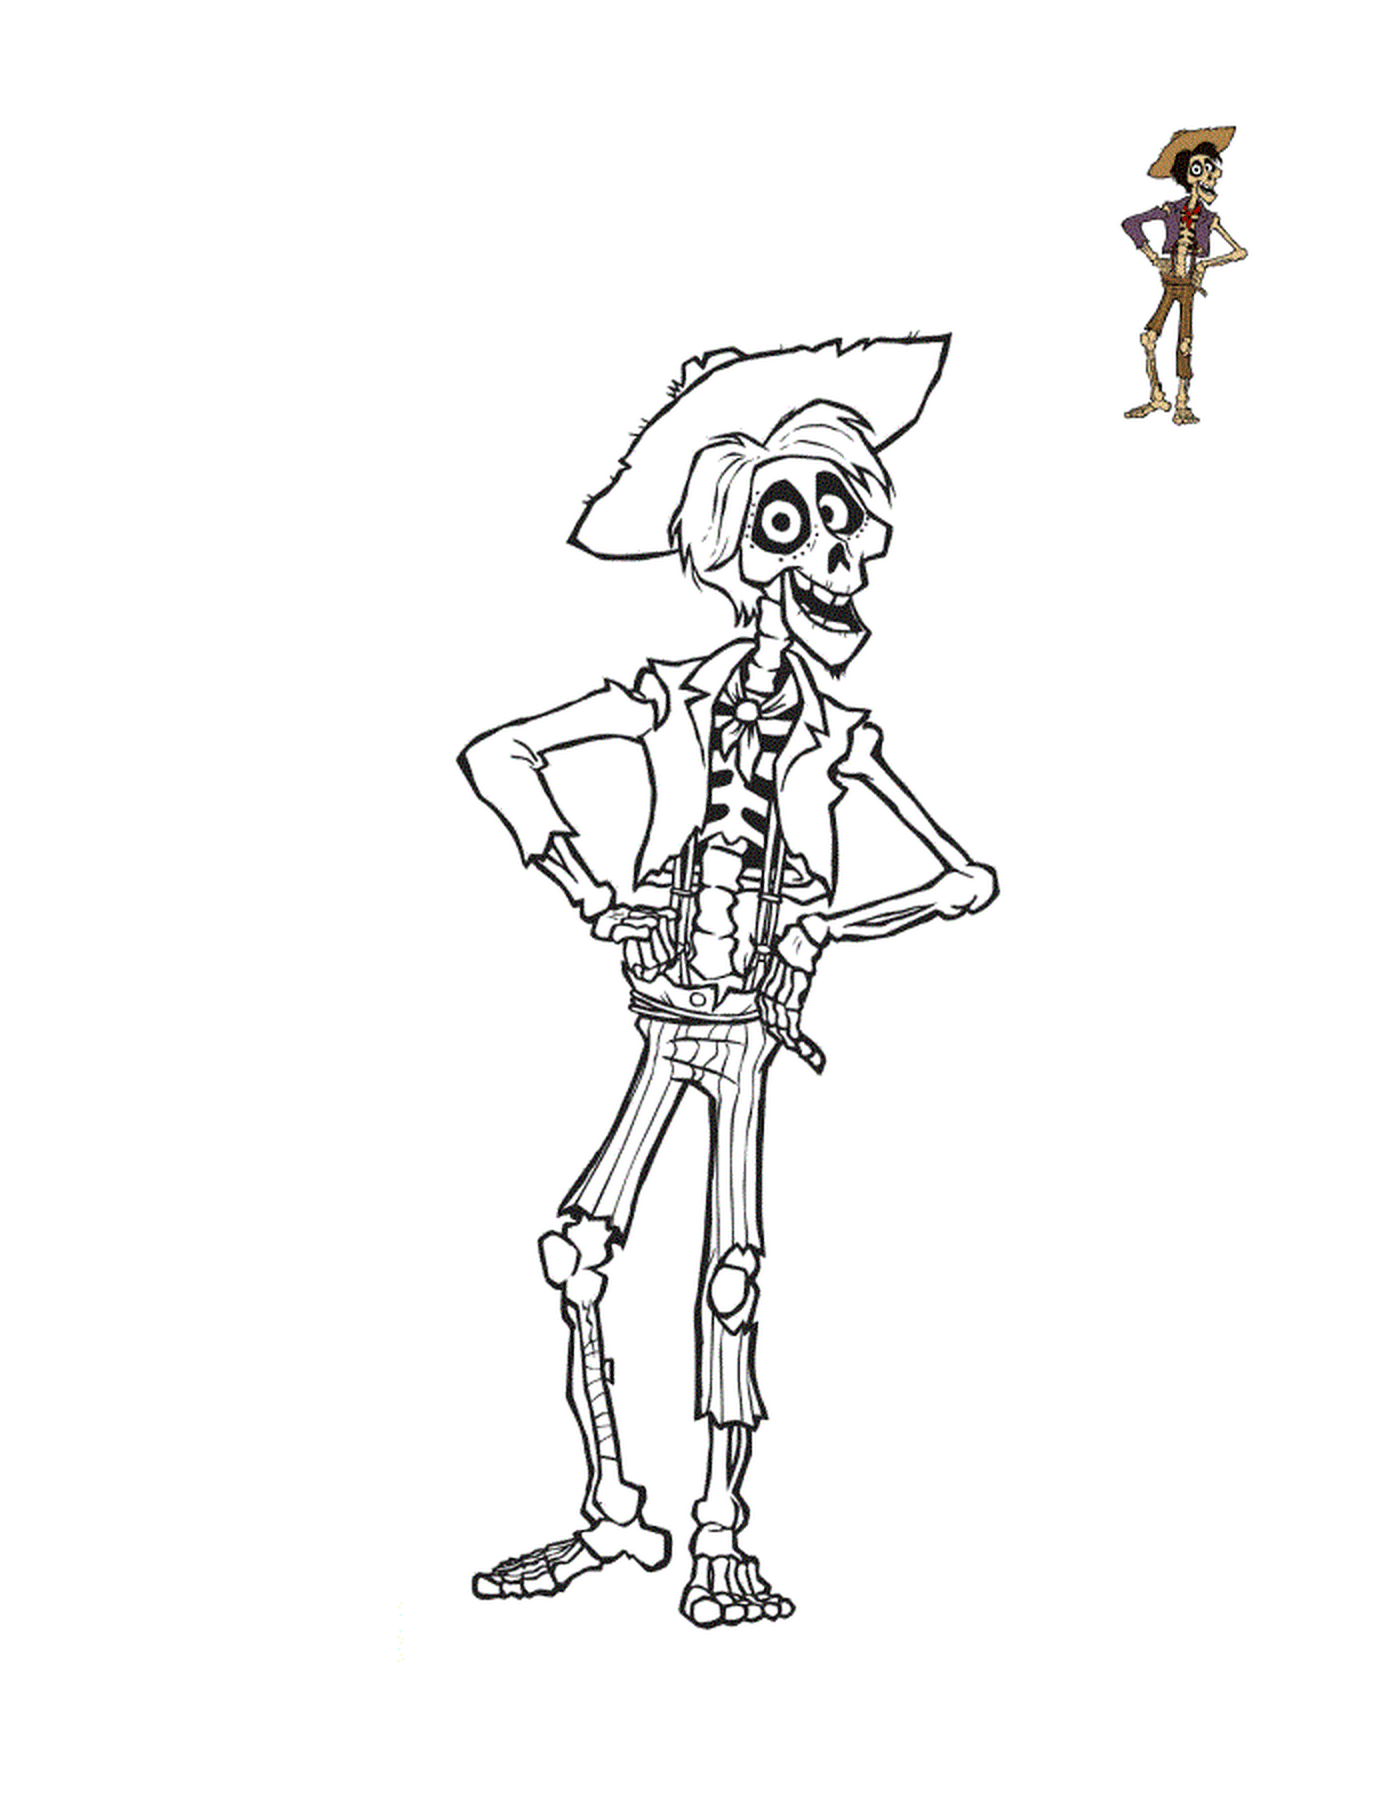  Hector, a slender skeleton with black hair and a barbichette, and magenta eyes 